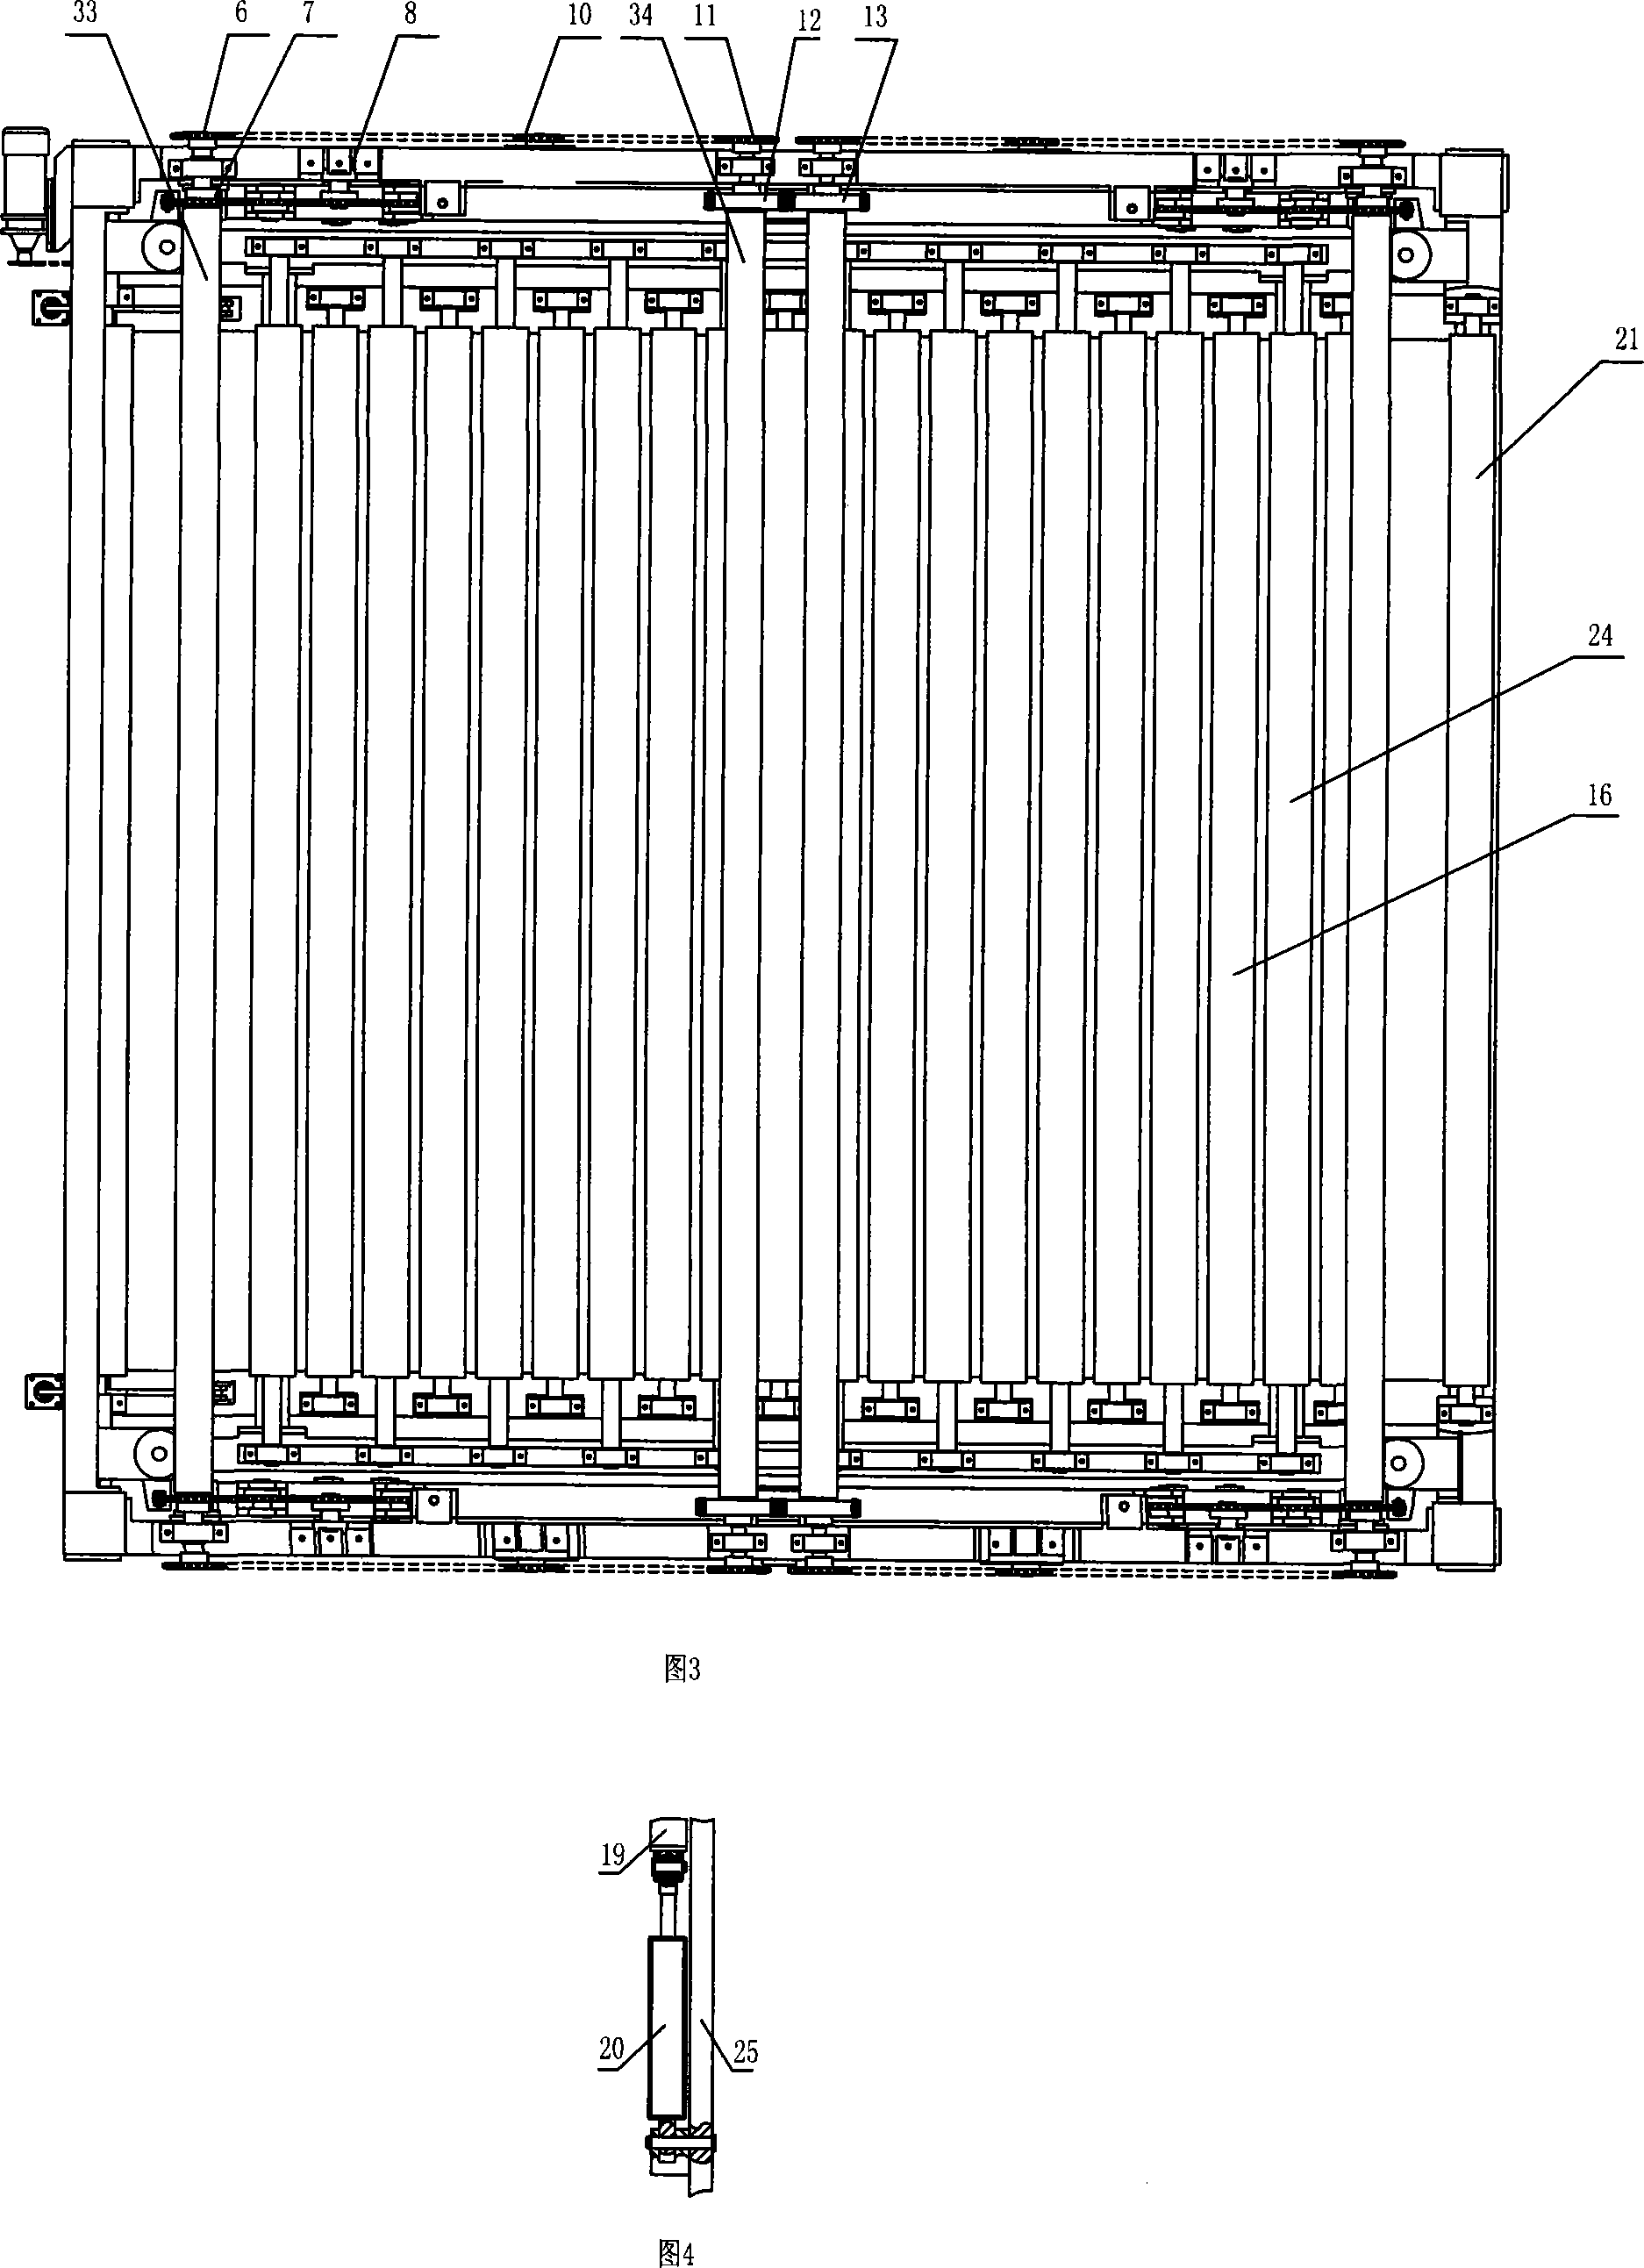 Roll material dynamic storing apparatus with tension control